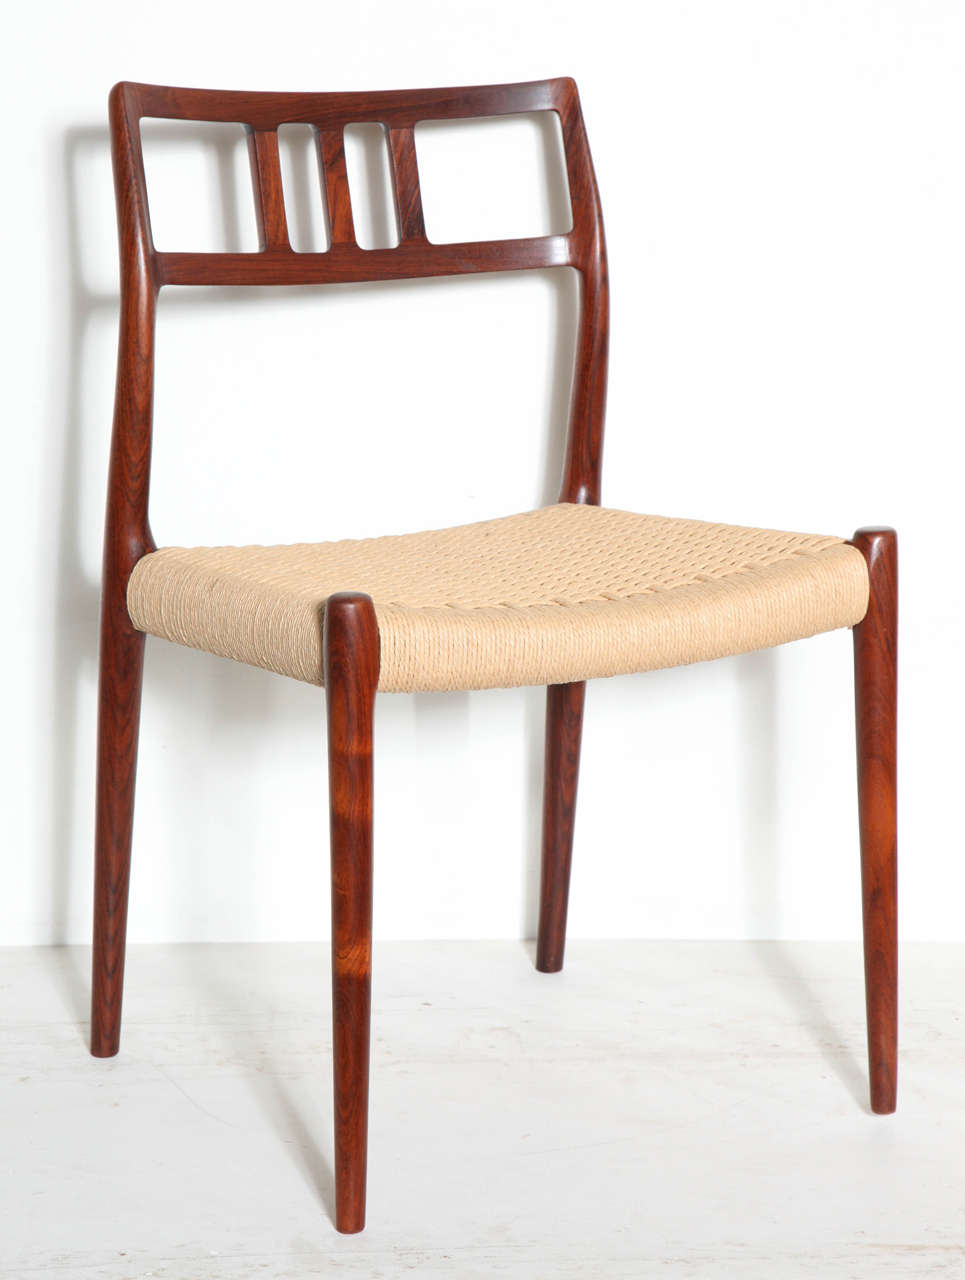 Vintage 1960s Rosewood Dining Chairs by Niels Møller. 

These Vintage Danish Dining Chairs are the classic No. 79 chairs. The seats of this set are in the traditional paper-cord. We can also reupholster them to fit your style. Ready for shipping,